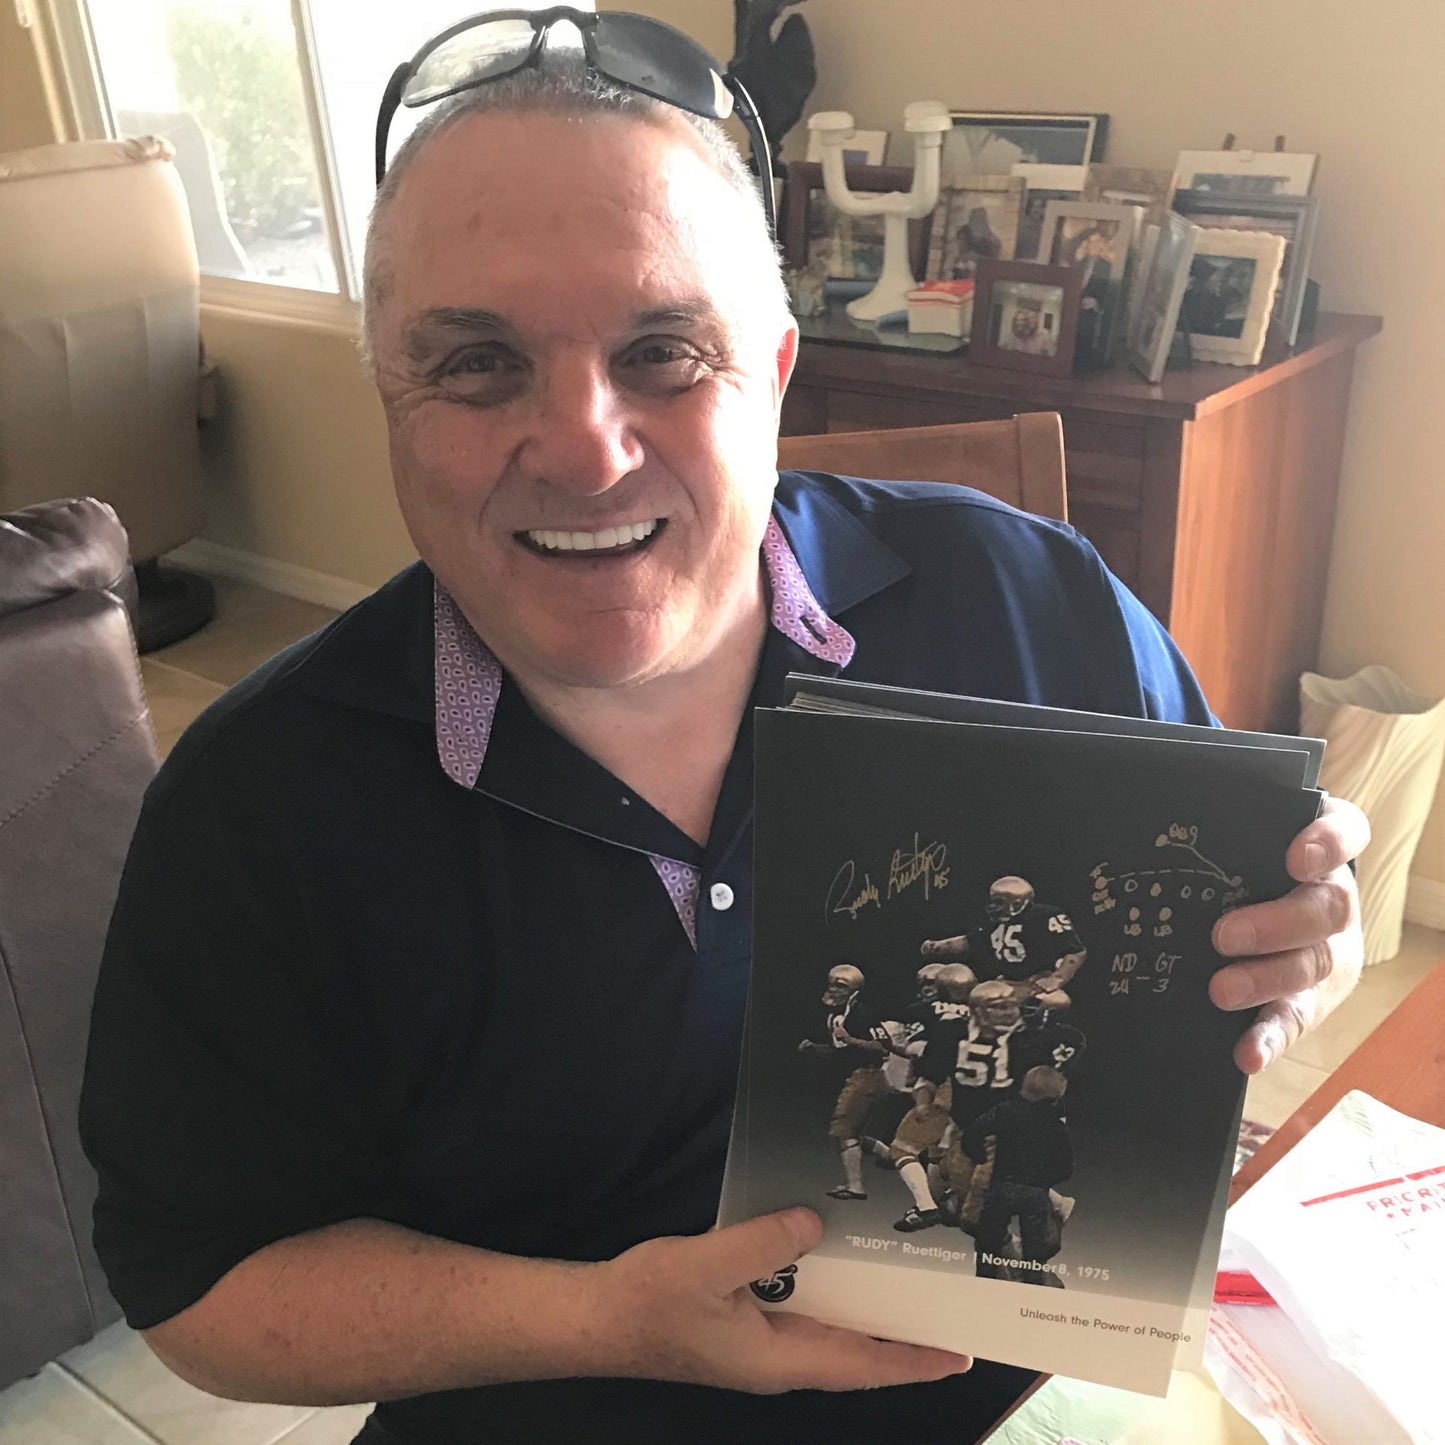 Rudy Ruettiger Autographed Notre Dame (Carried off Field) 8x10 Photo w/ Full Drawn Play